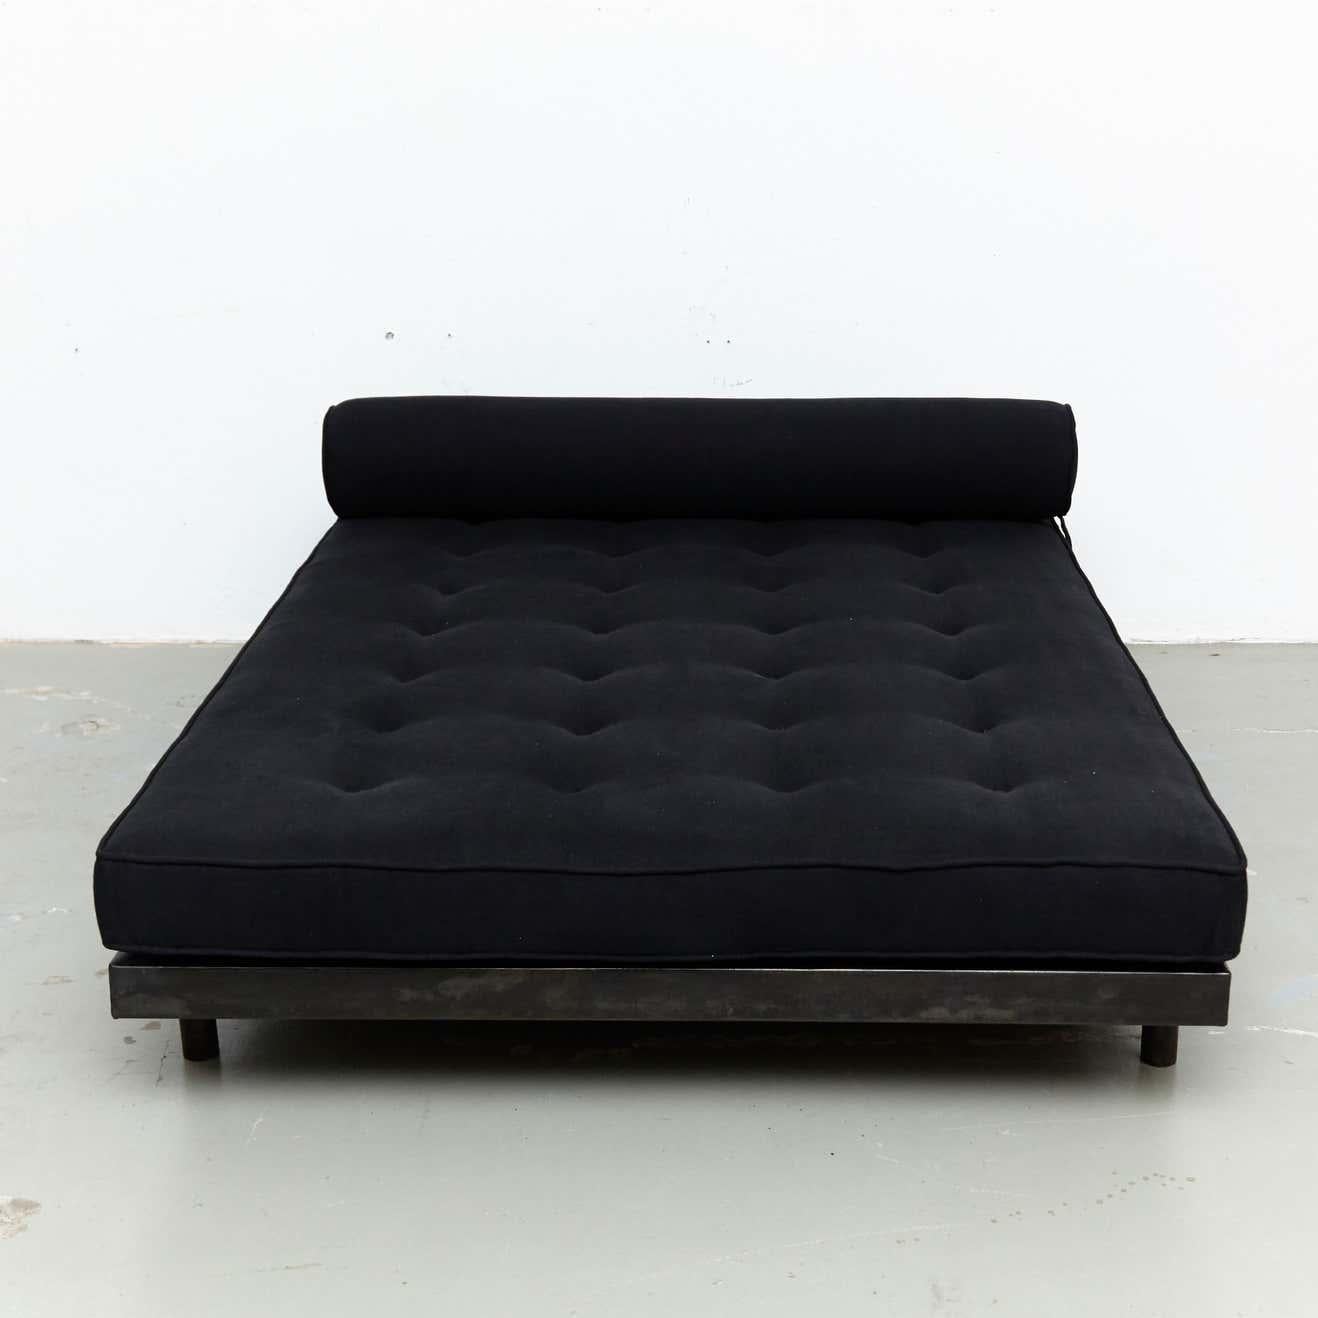 Jean Prouvé S.C.A.L. Double Daybed, circa 1950 For Sale 2